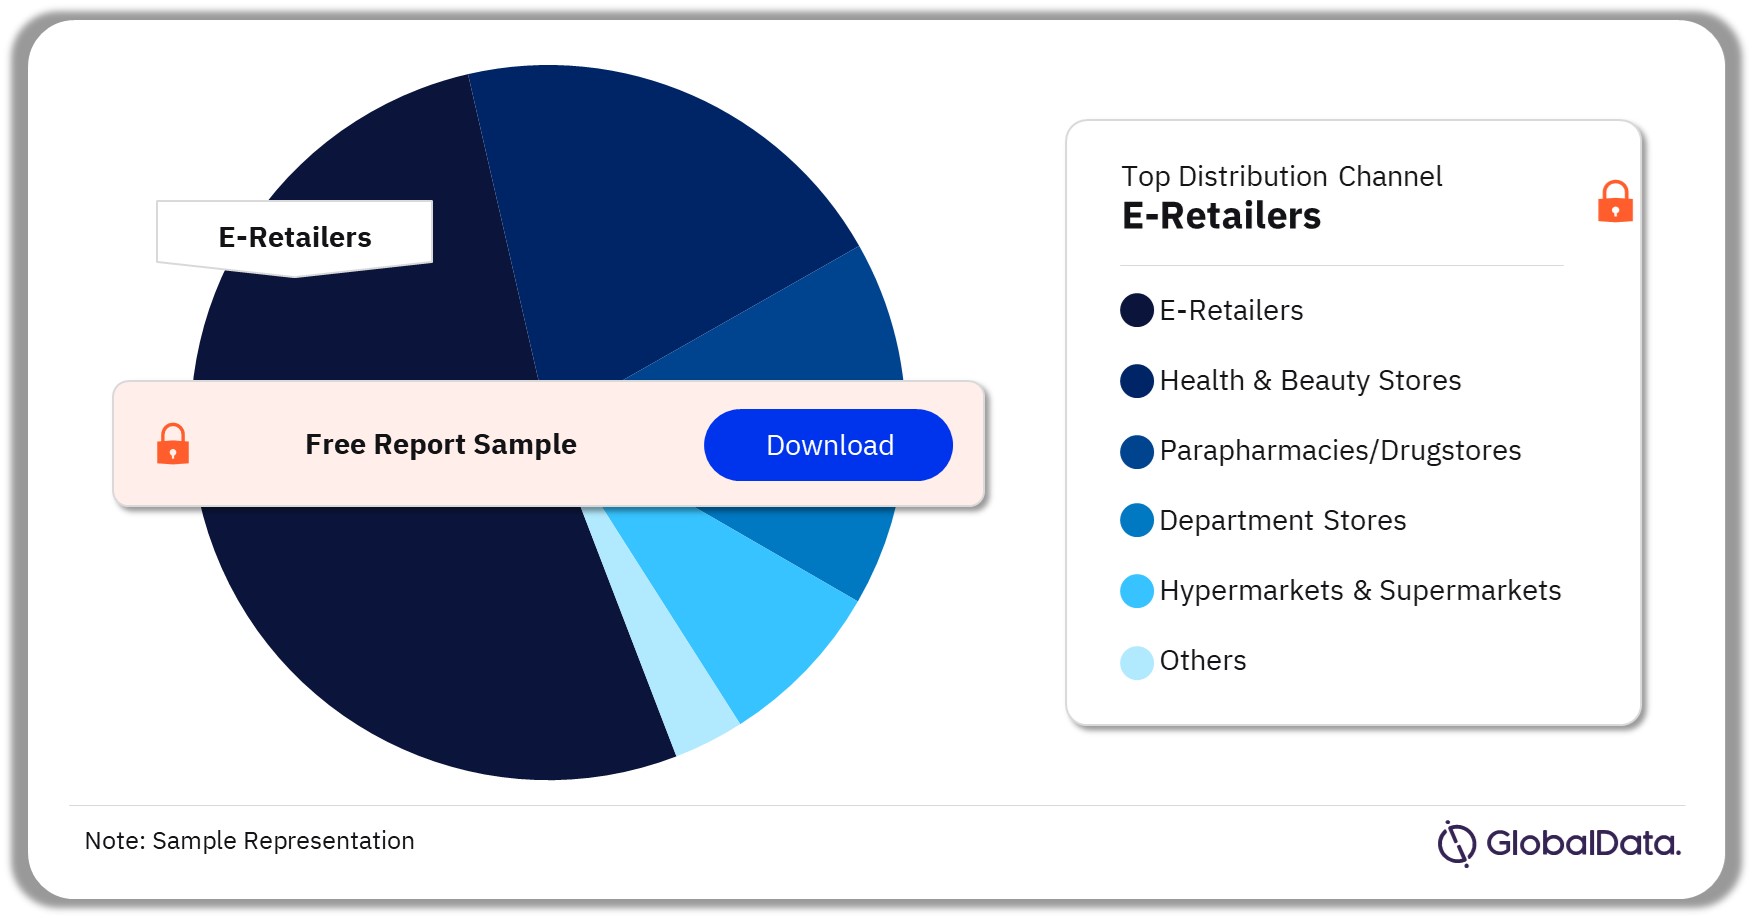 US Make-up Market Analysis by Distribution Channels, 2021 (%)